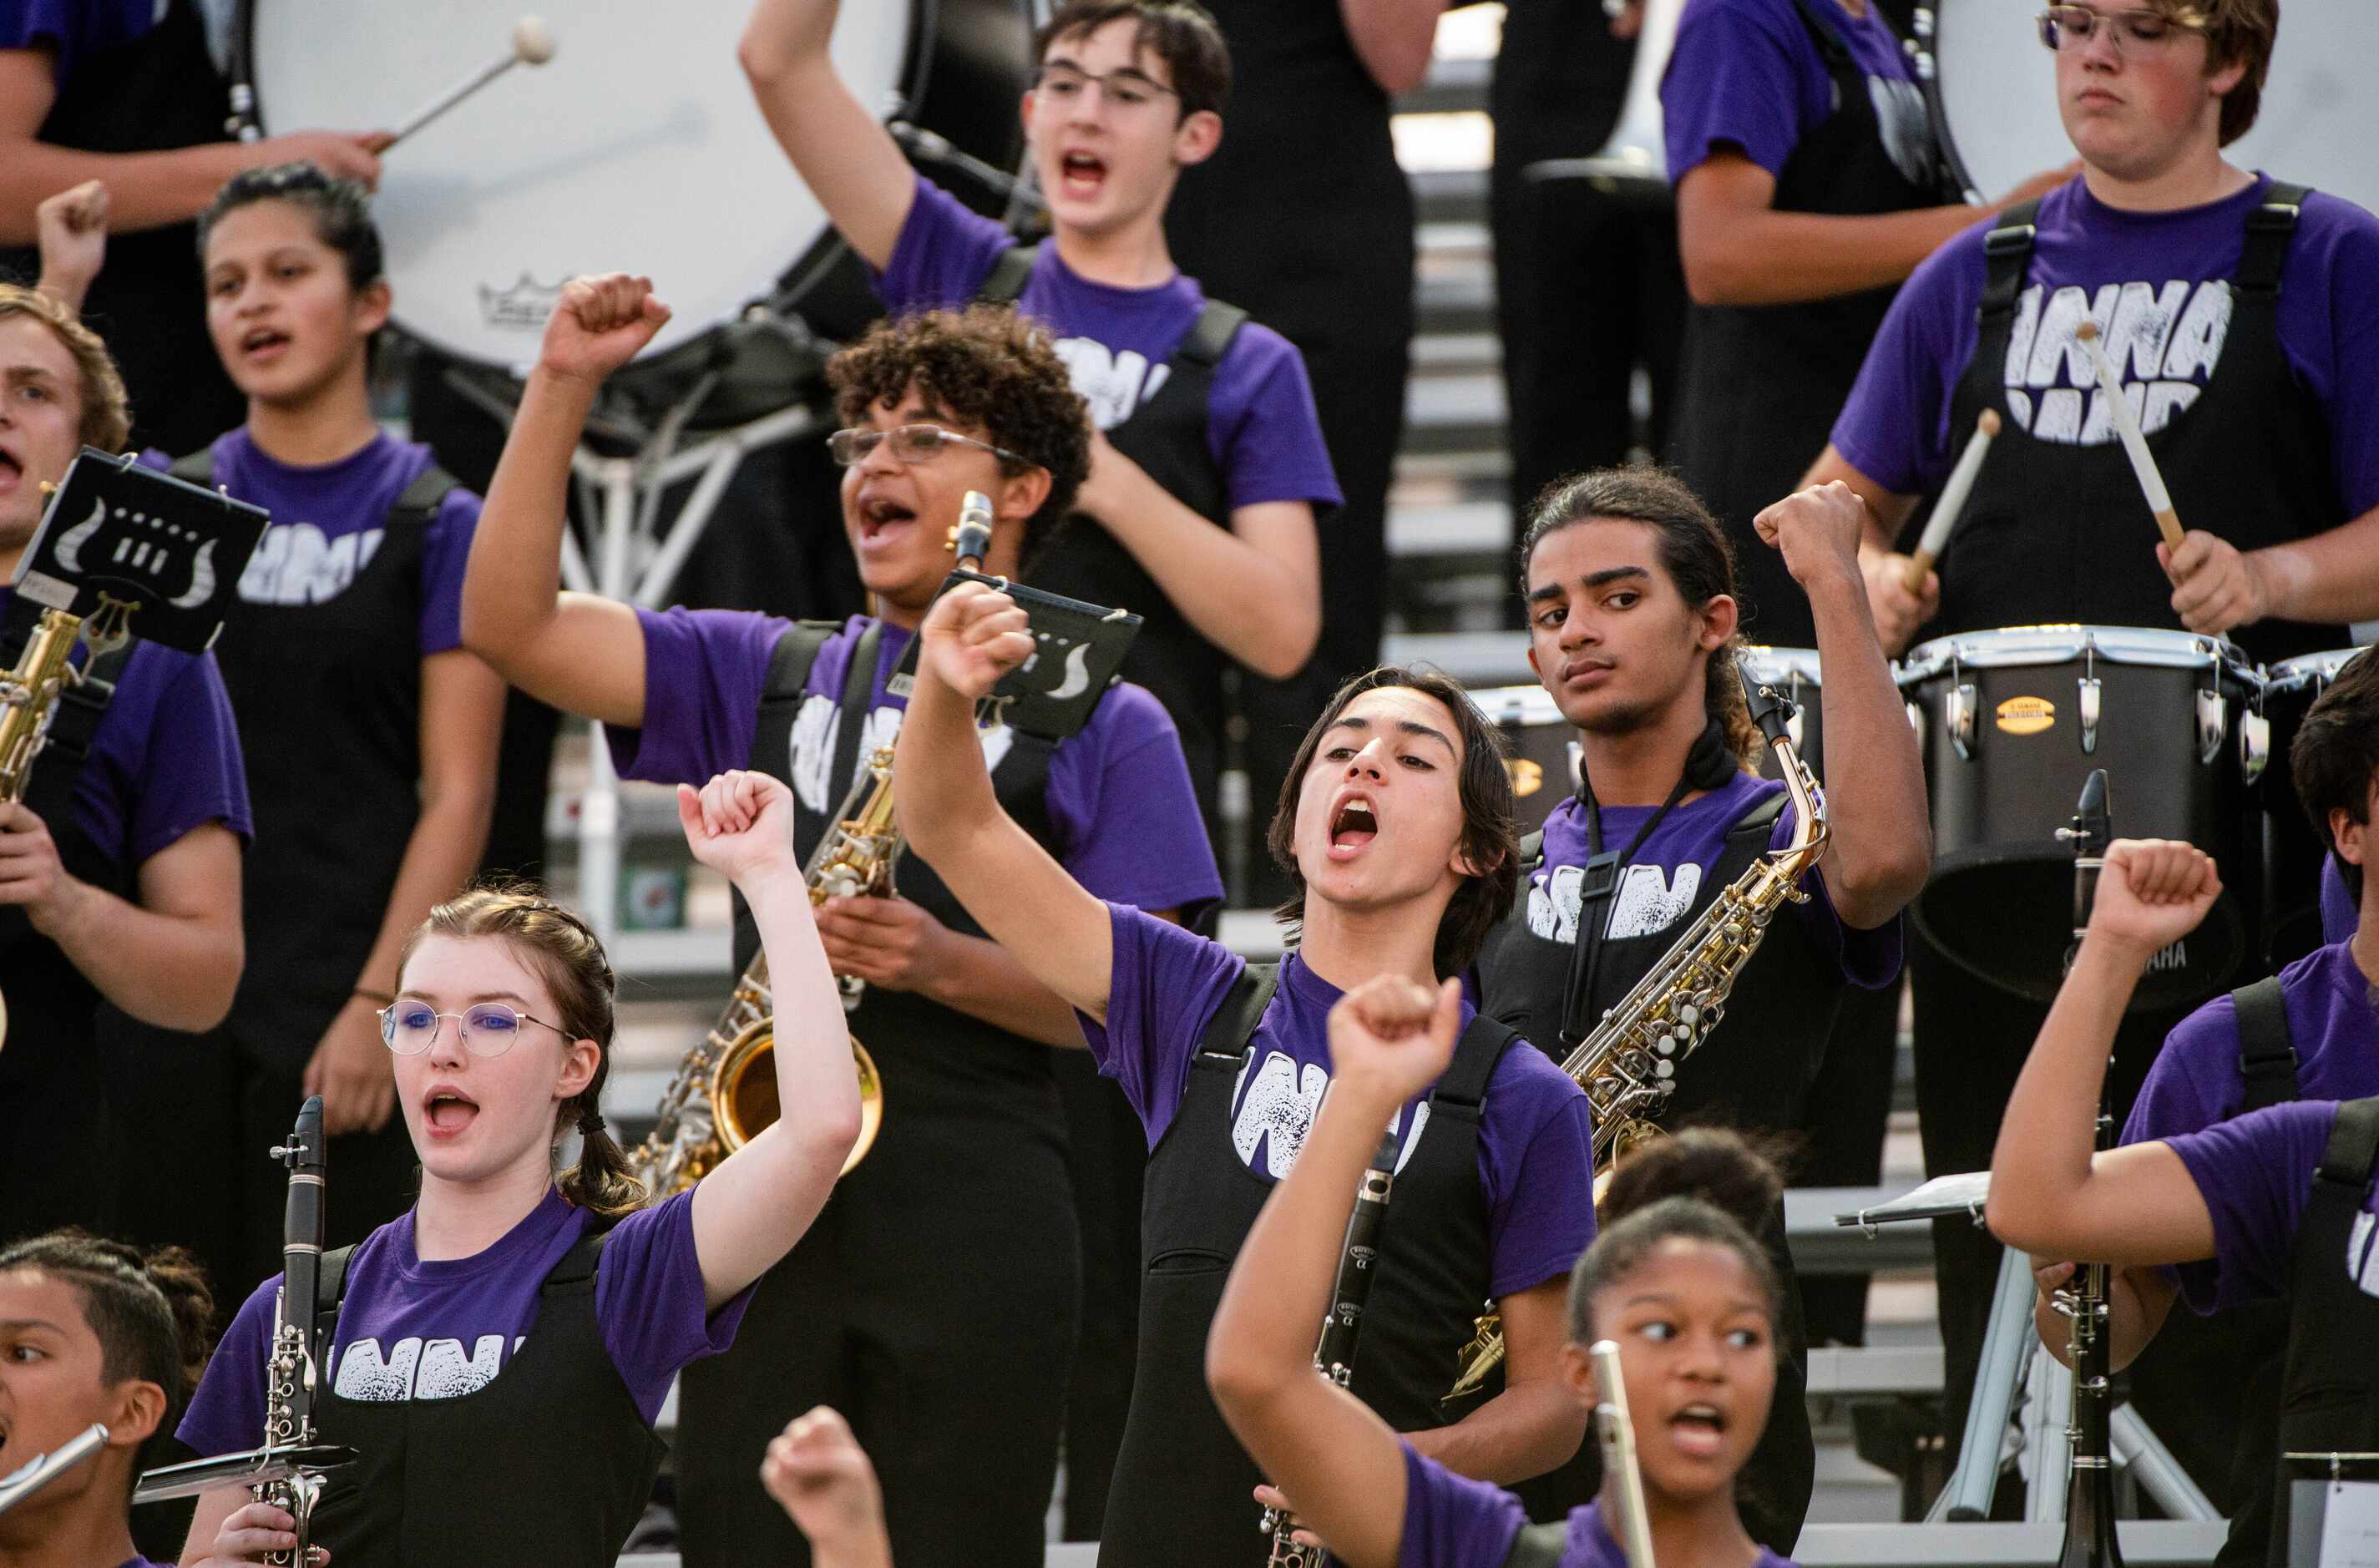 Anna band members cheer in the stands during a high school football game against Celina,...